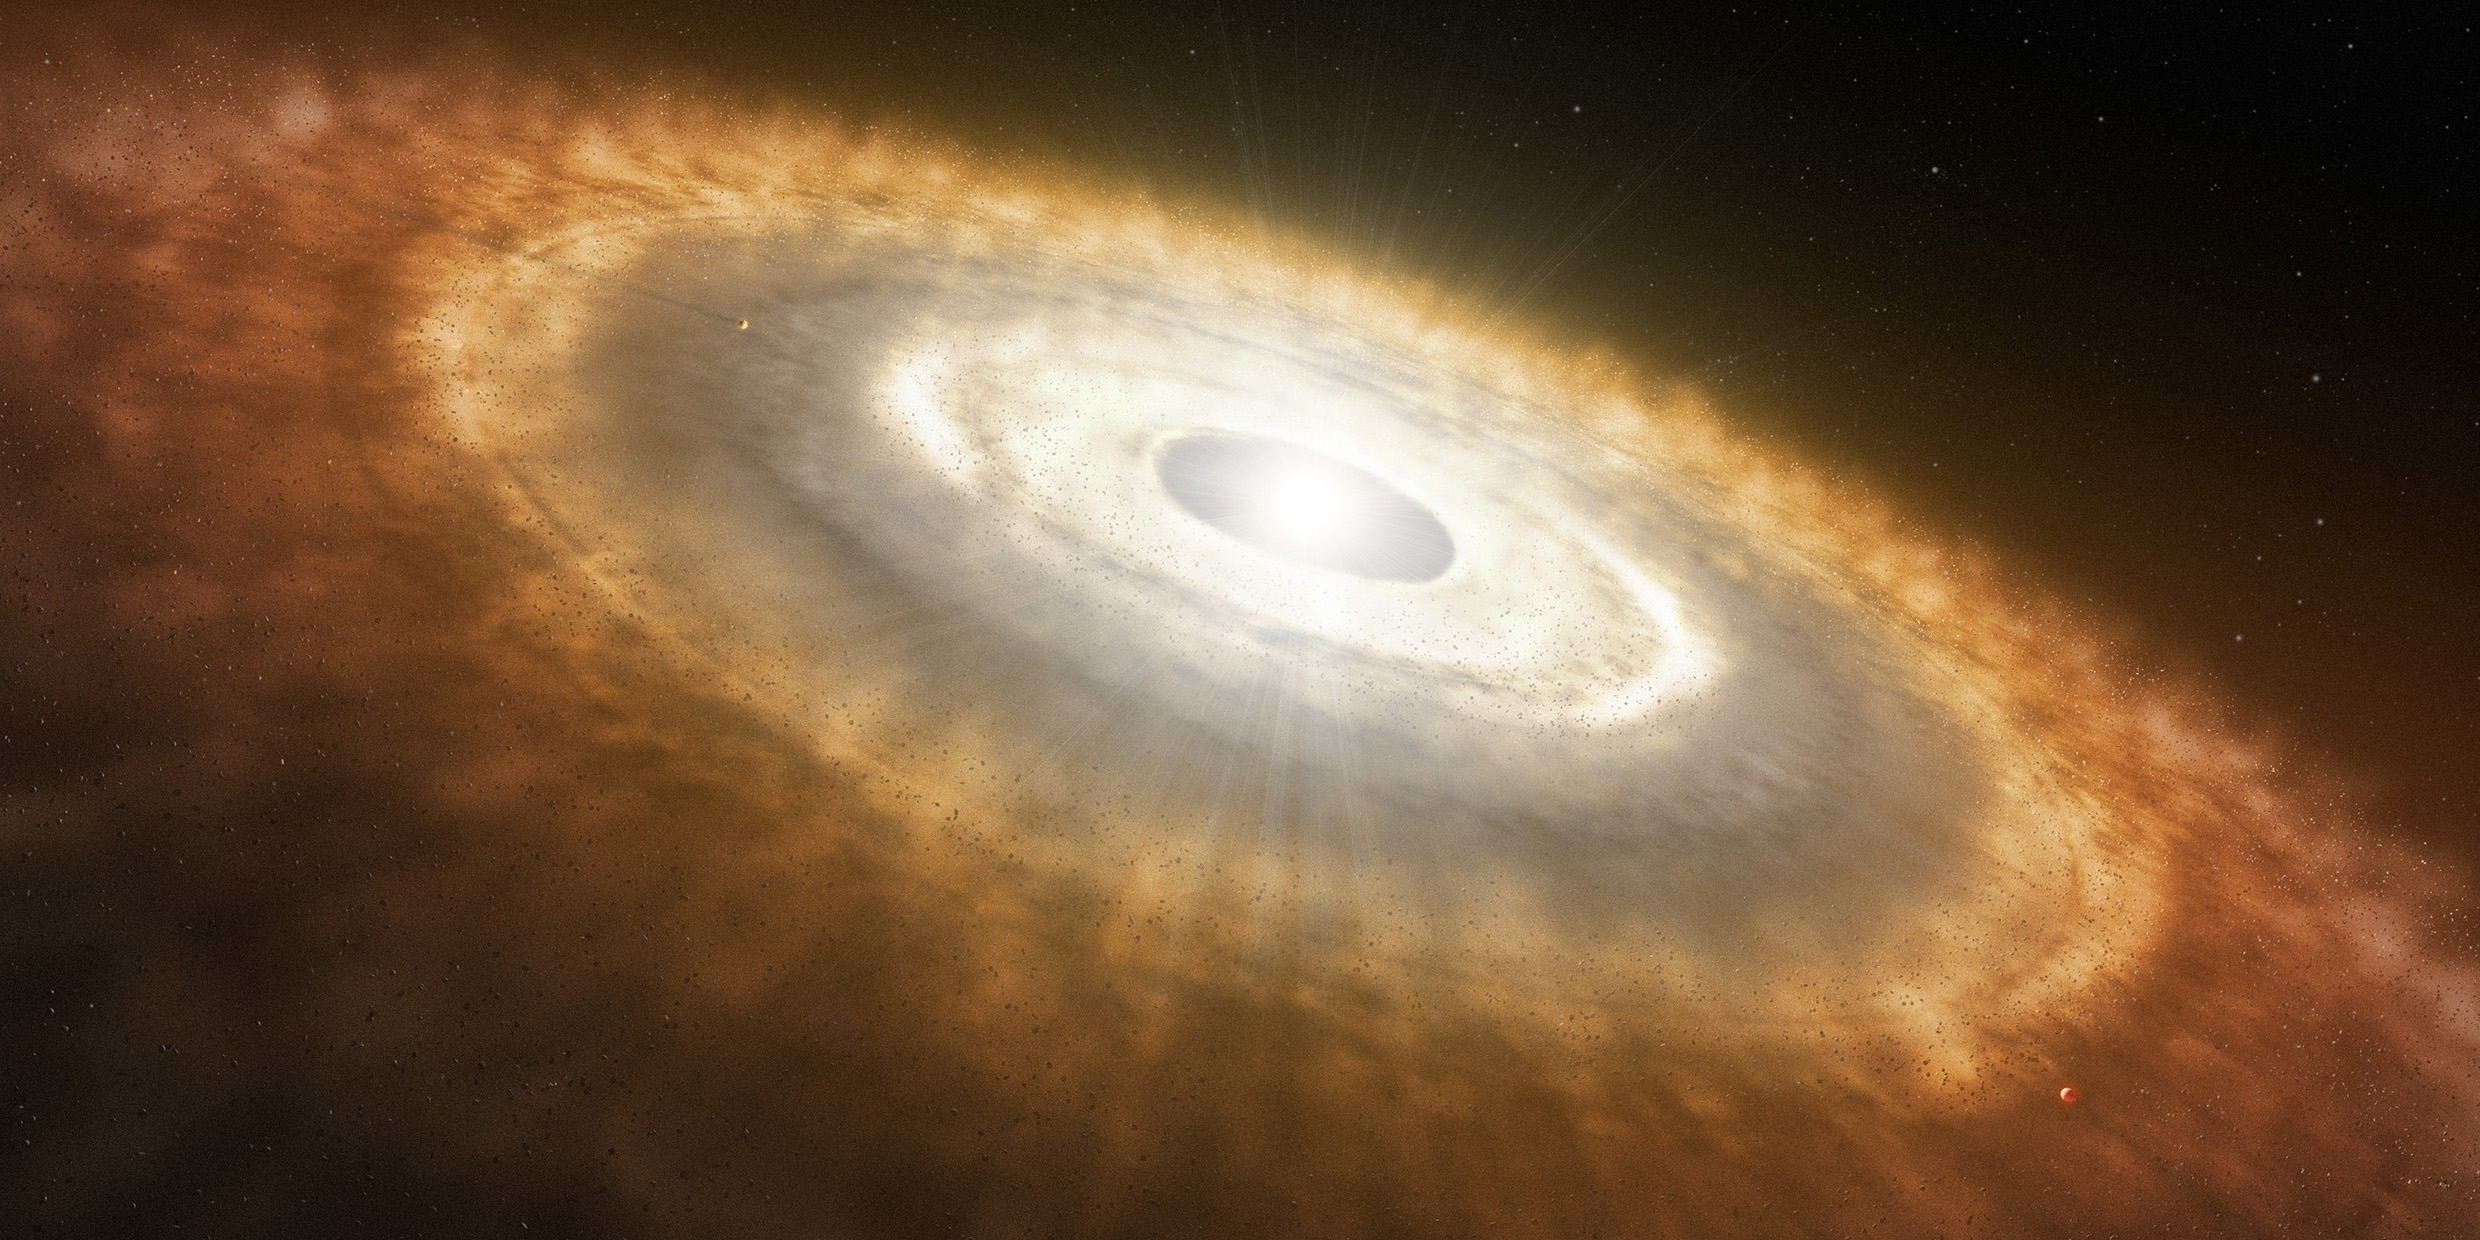 Artist's impression of a protoplanetary disc